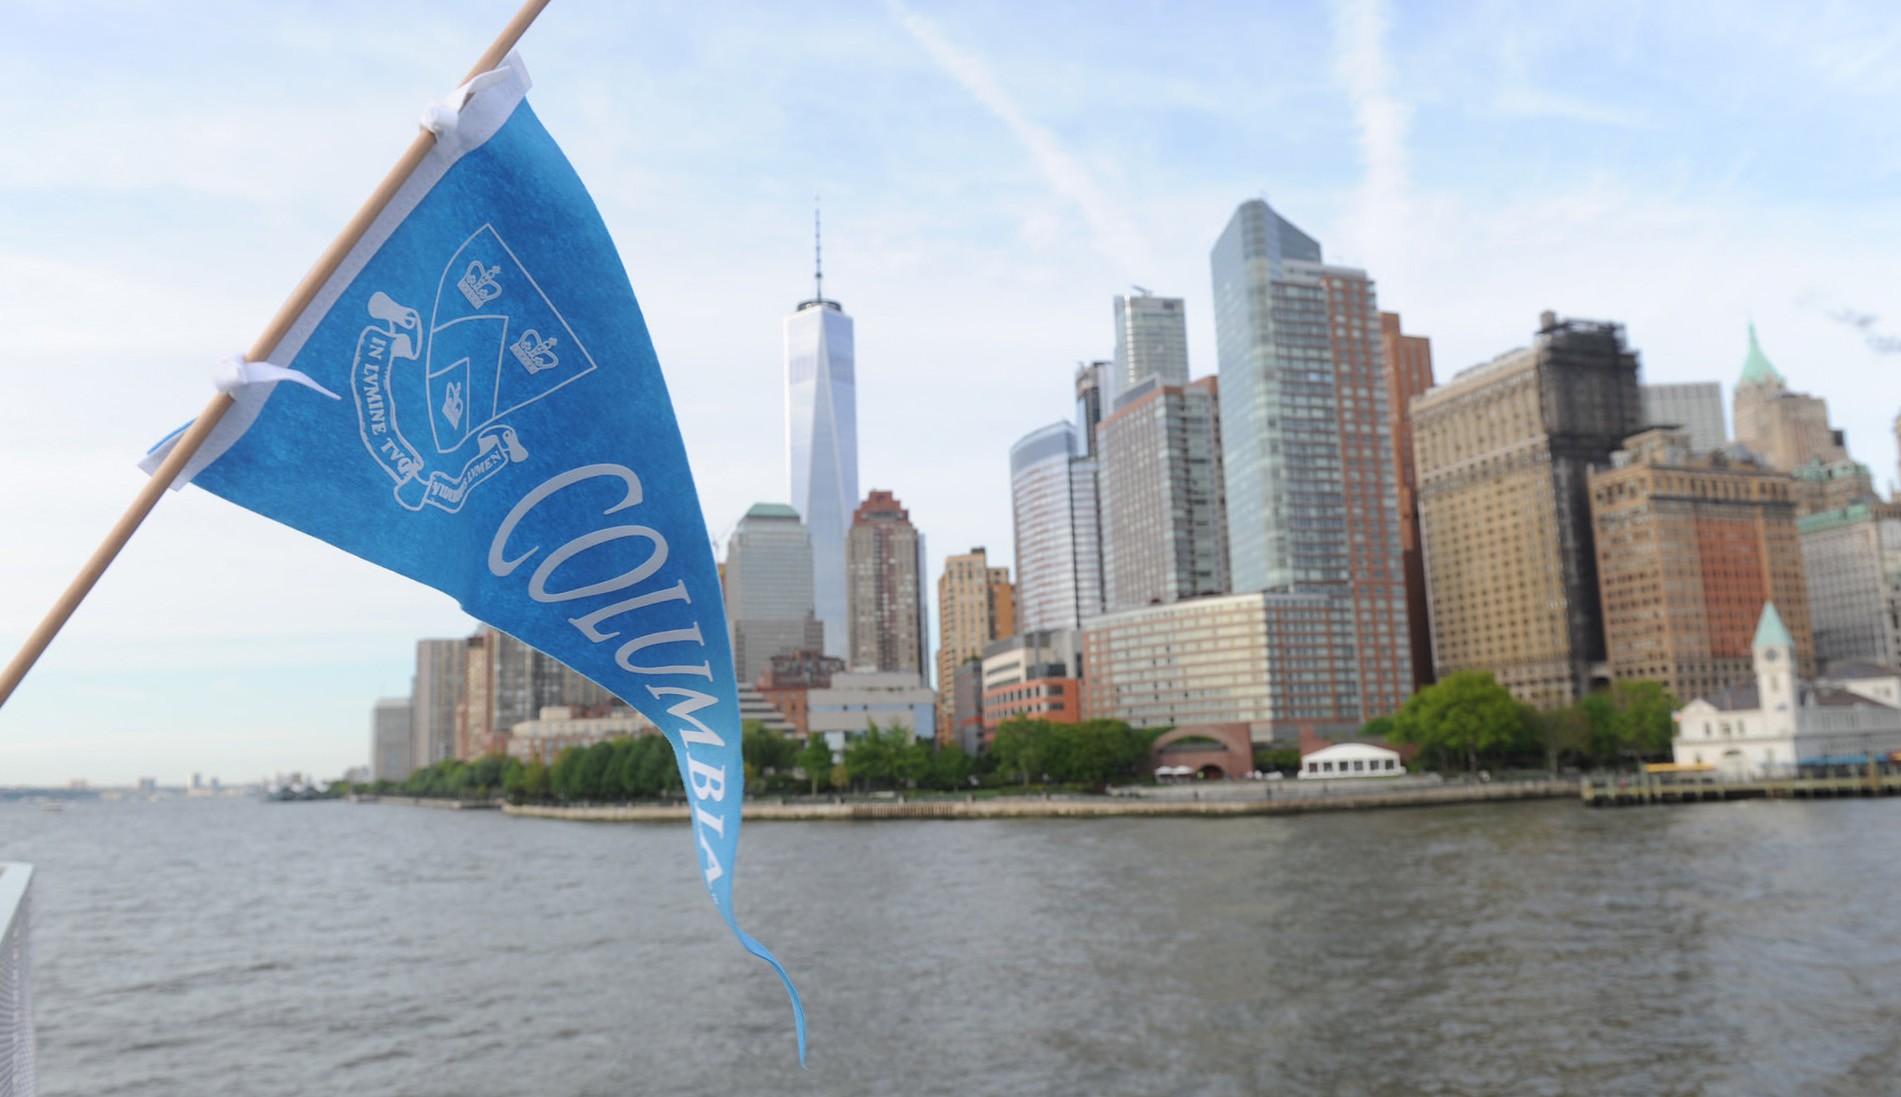 Image of Ellis Island with a blue Columbia University banner with the Columbia Crest in White.